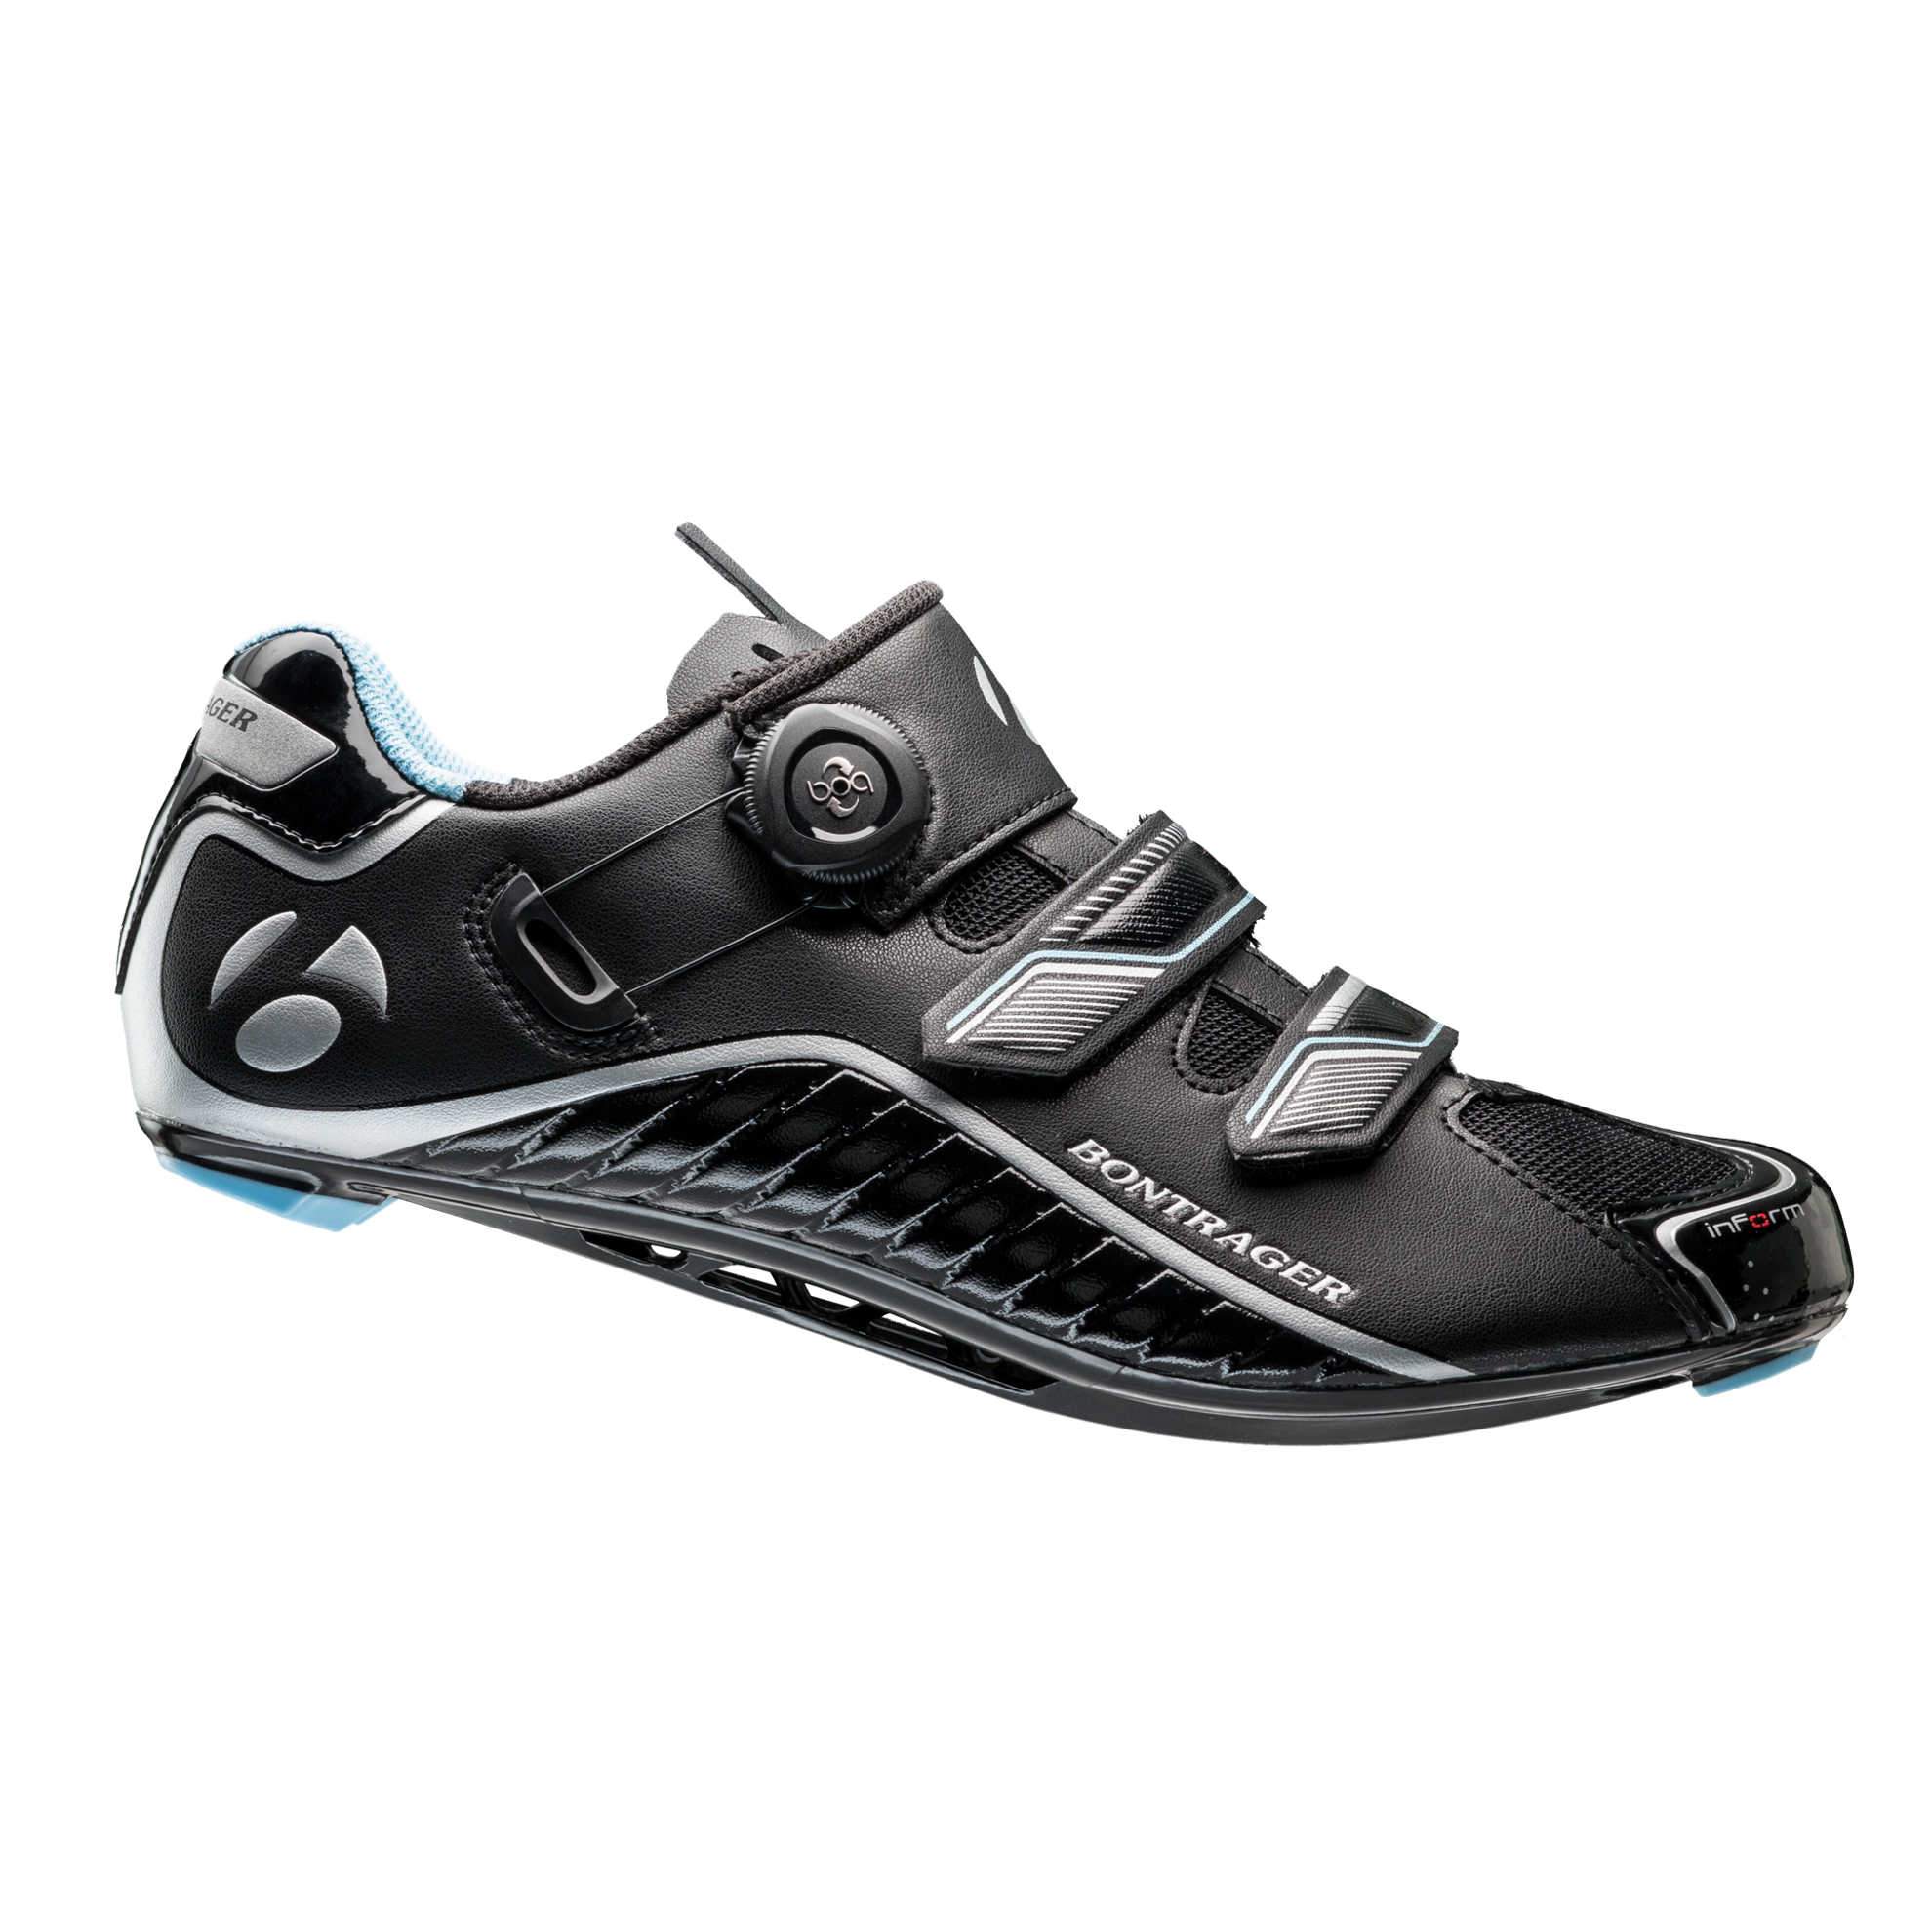 bontrager ladies cycling shoes